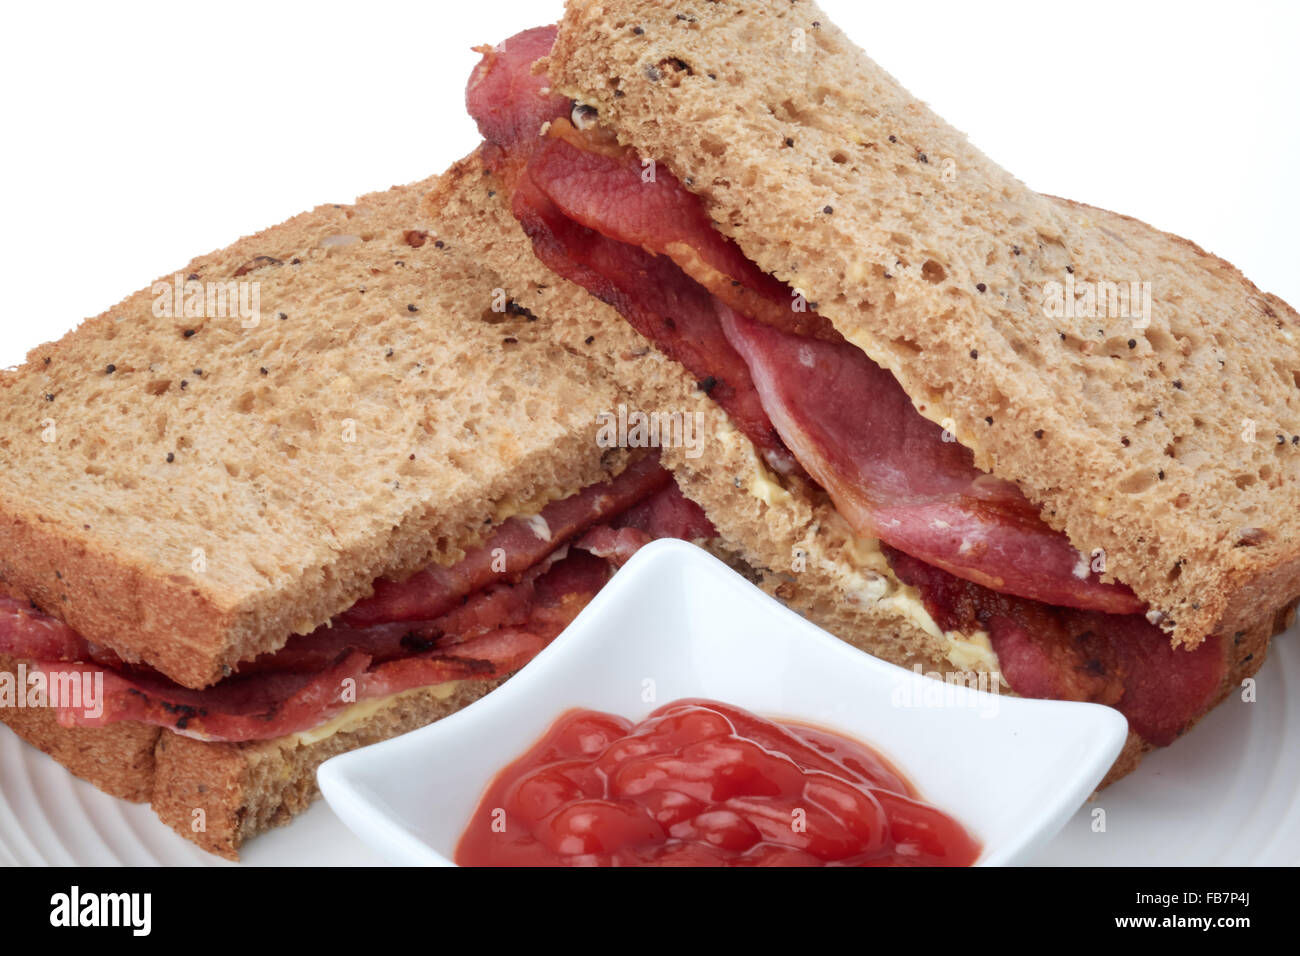 A bacon sandwich in granary brown bread with some tomato ketchup - studio shot with a white background. Stock Photo